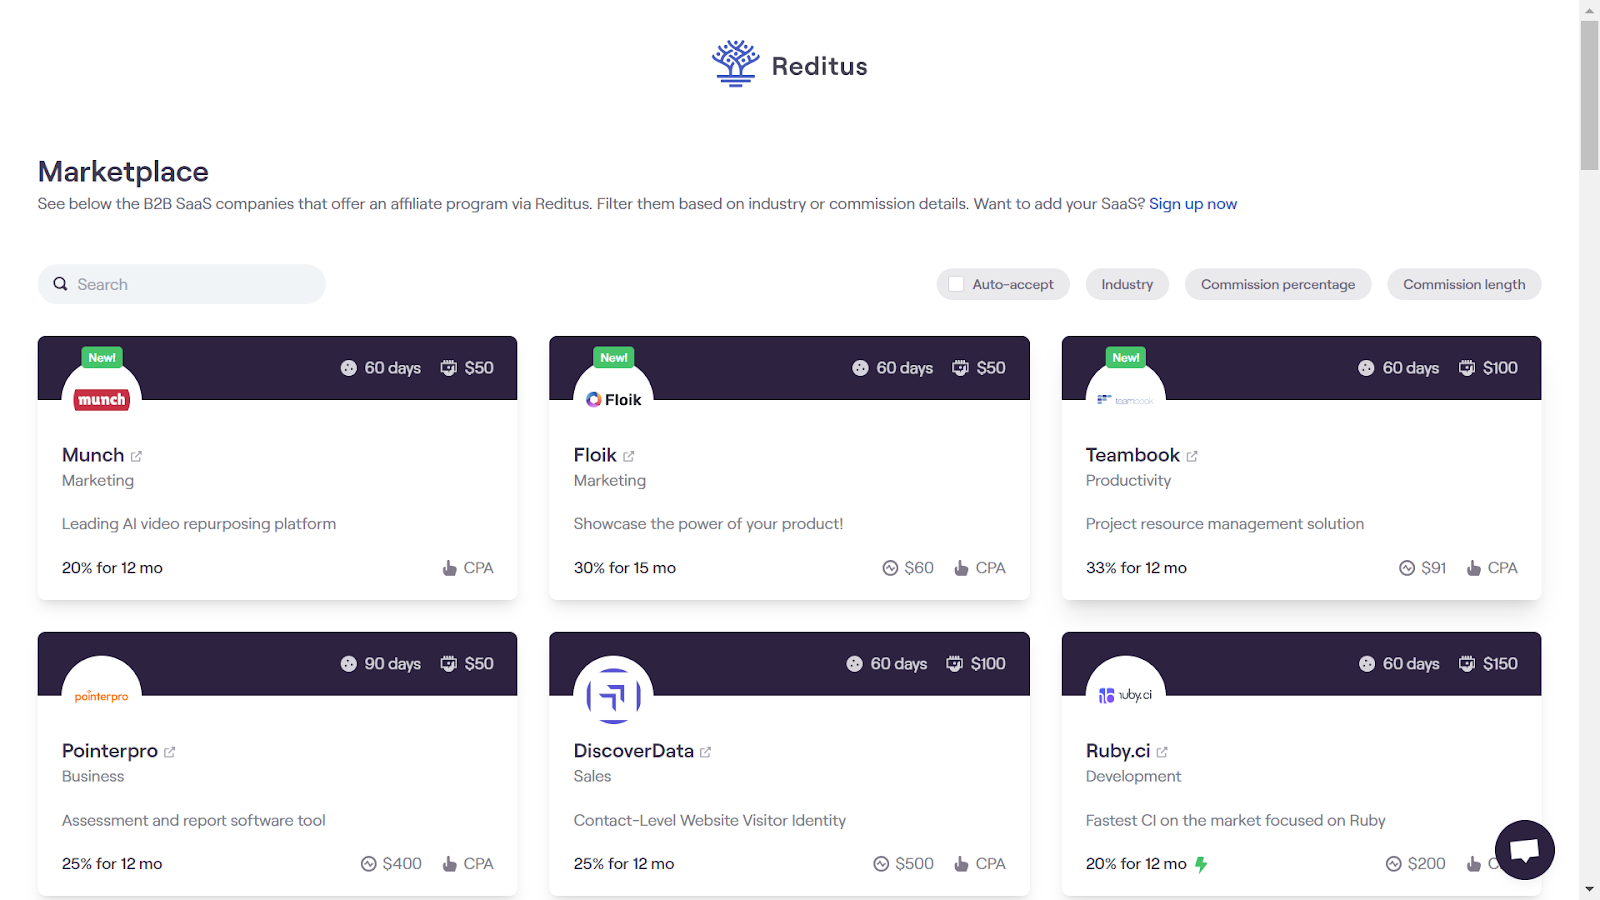 Screenshot from the Reditus Marketplace.